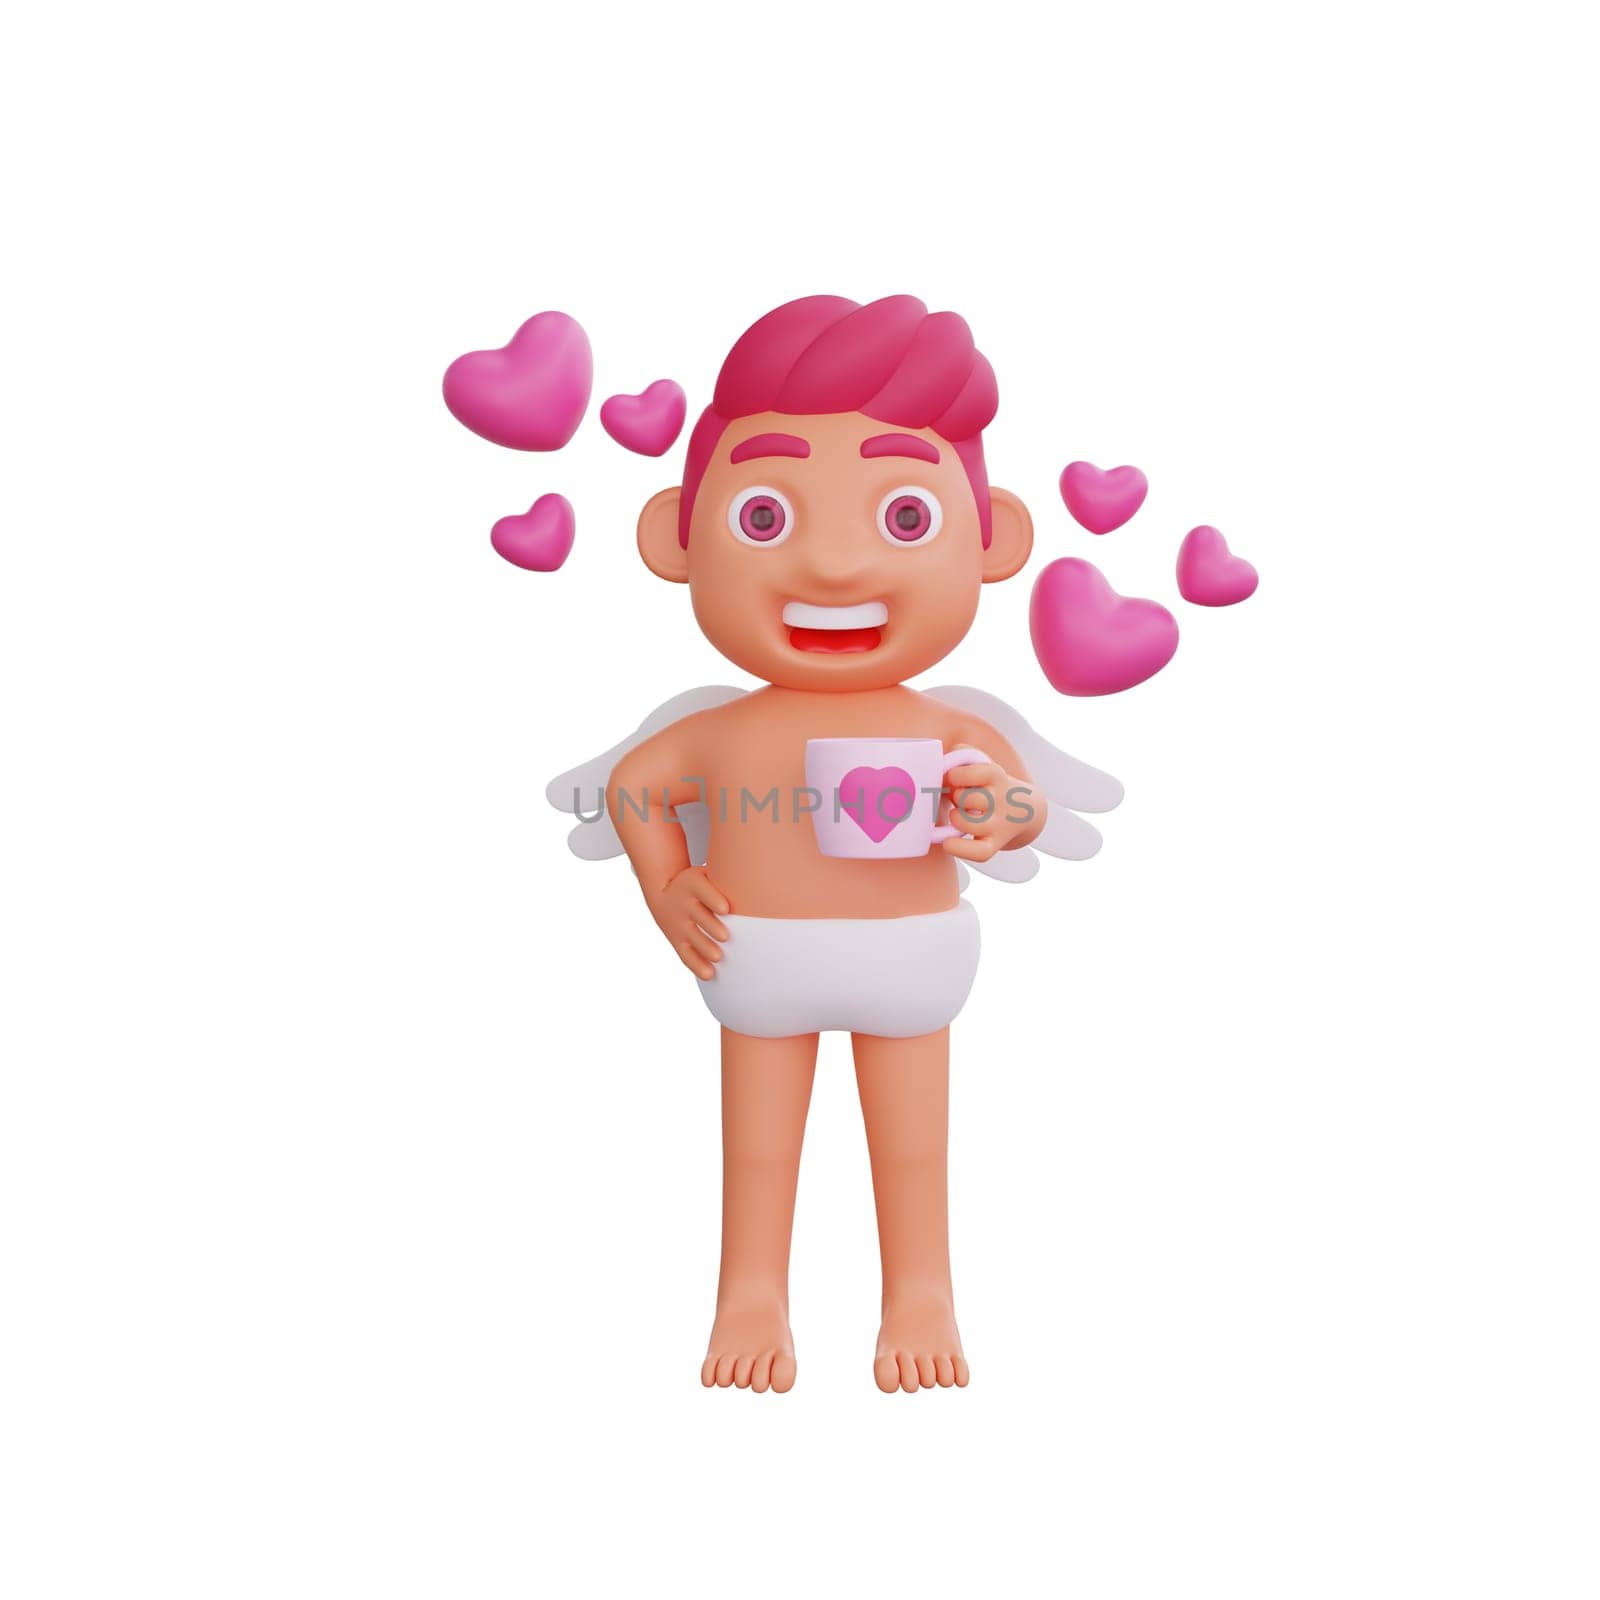 3D illustration of Valentine Cupid character Holding a love-shaped glass by Rahmat_Djayusman